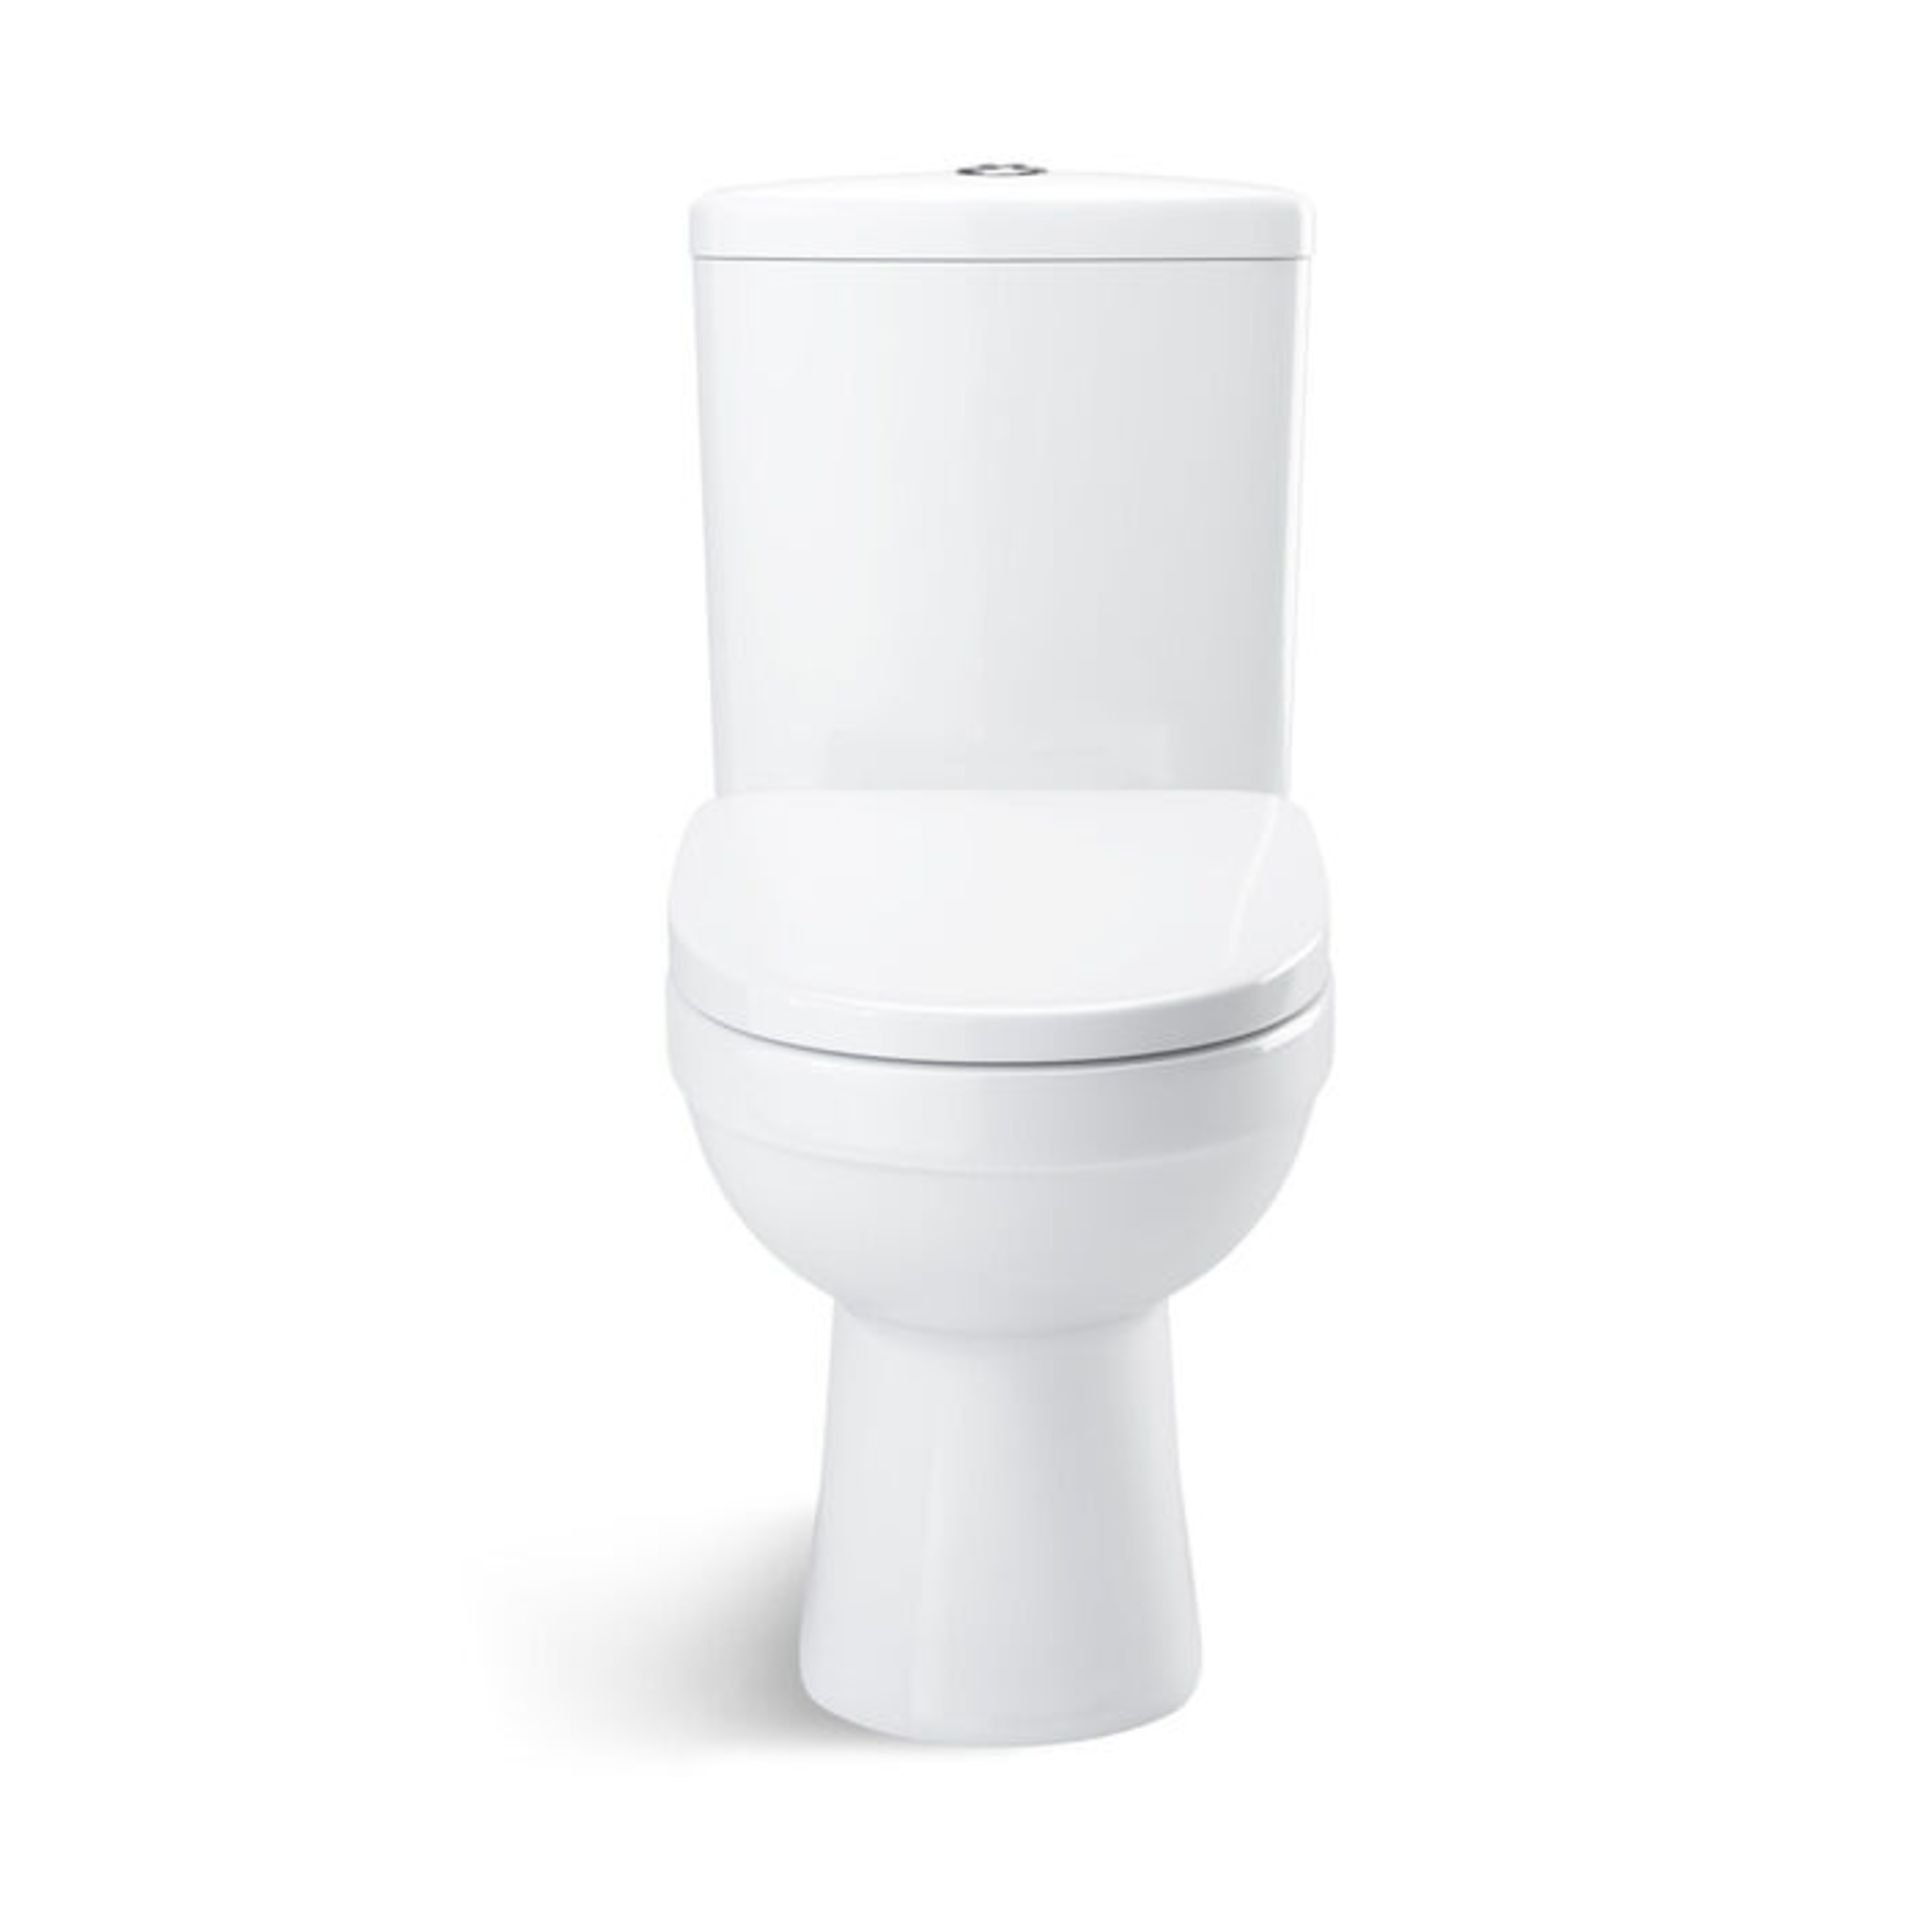 (G176) Sabrosa II Close Coupled Toilet & Cistern inc Soft Close Seat Made from White Vitreous ... - Image 2 of 4